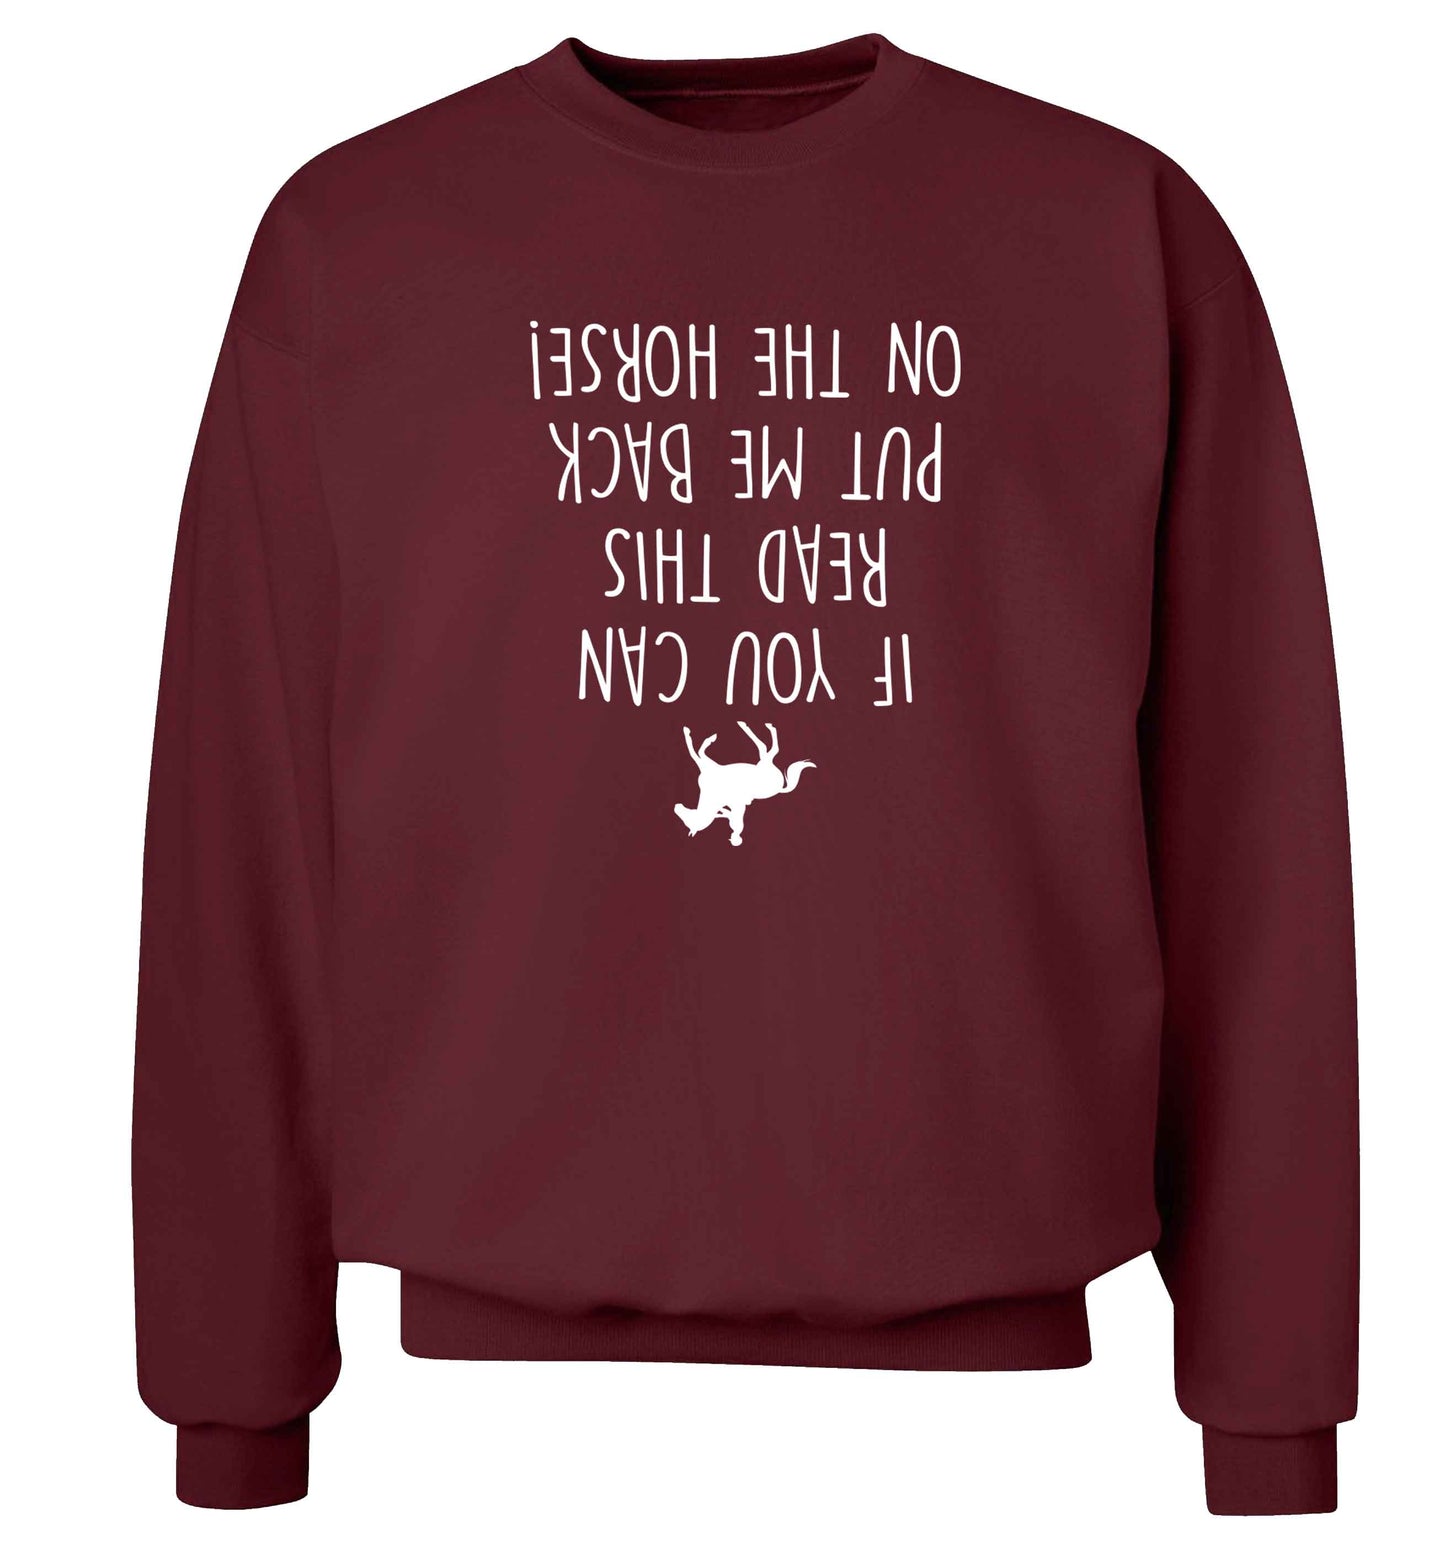 If you can read this put me back on the horse adult's unisex maroon sweater 2XL